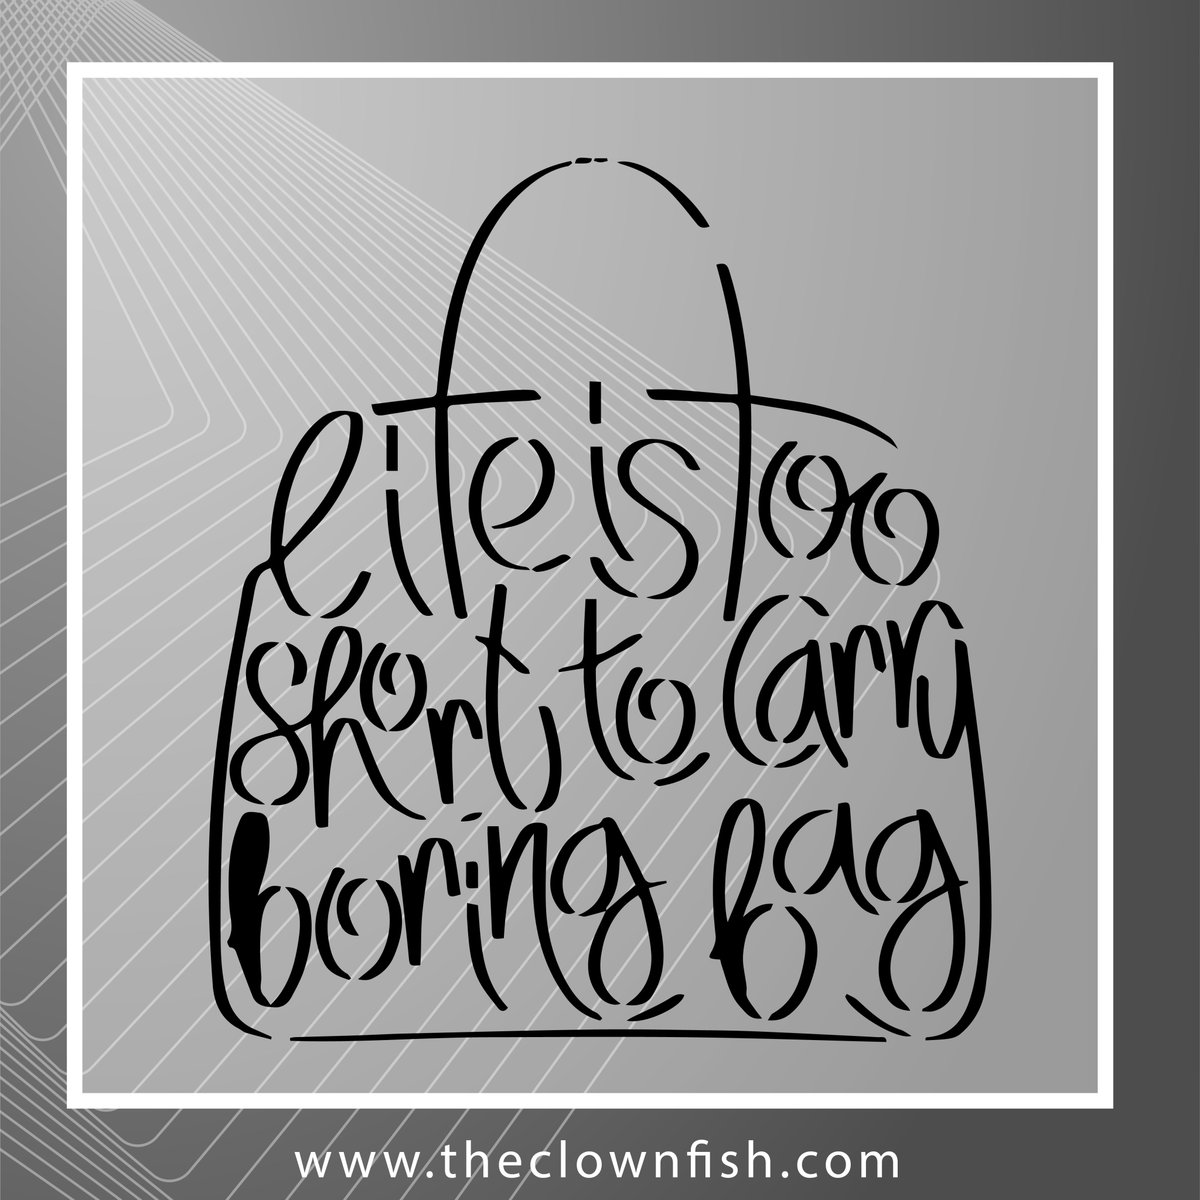 “Life is too Short to Carry Boring Bag ' 
Isn't It ?

Drop 'YES' if you agree 

Shop now on :
theclownfish.com

#quotes #motivationalquotes #bagquote #LatestFashionBag
 #satisfiedcustomer #womenspurse #womenwallets
#bags #fashion #bag #style #accessories